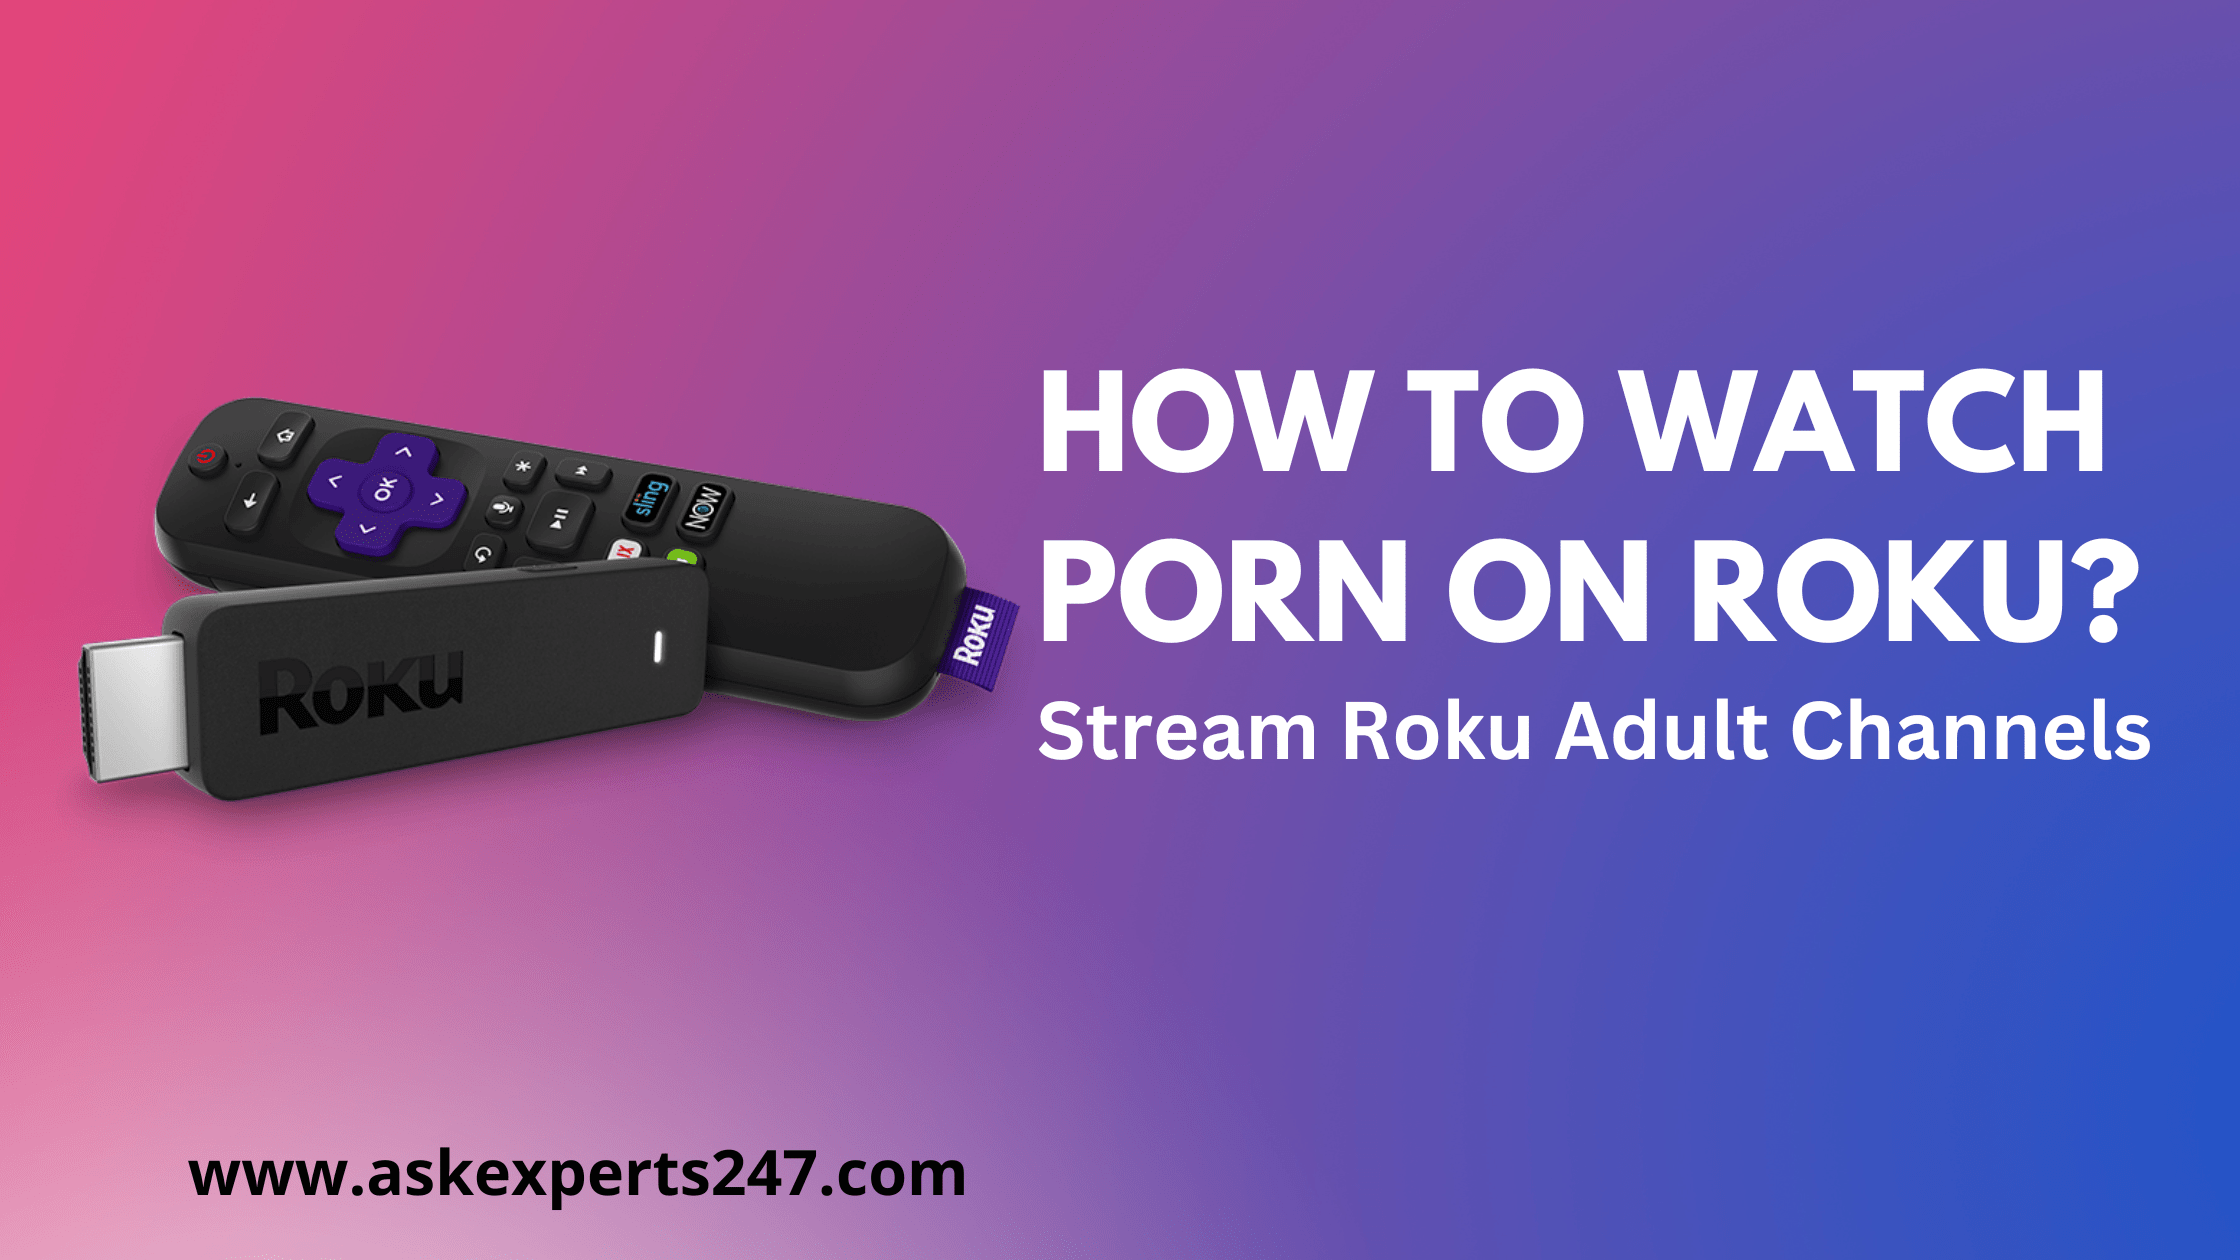 How to Watch Porn on Roku?